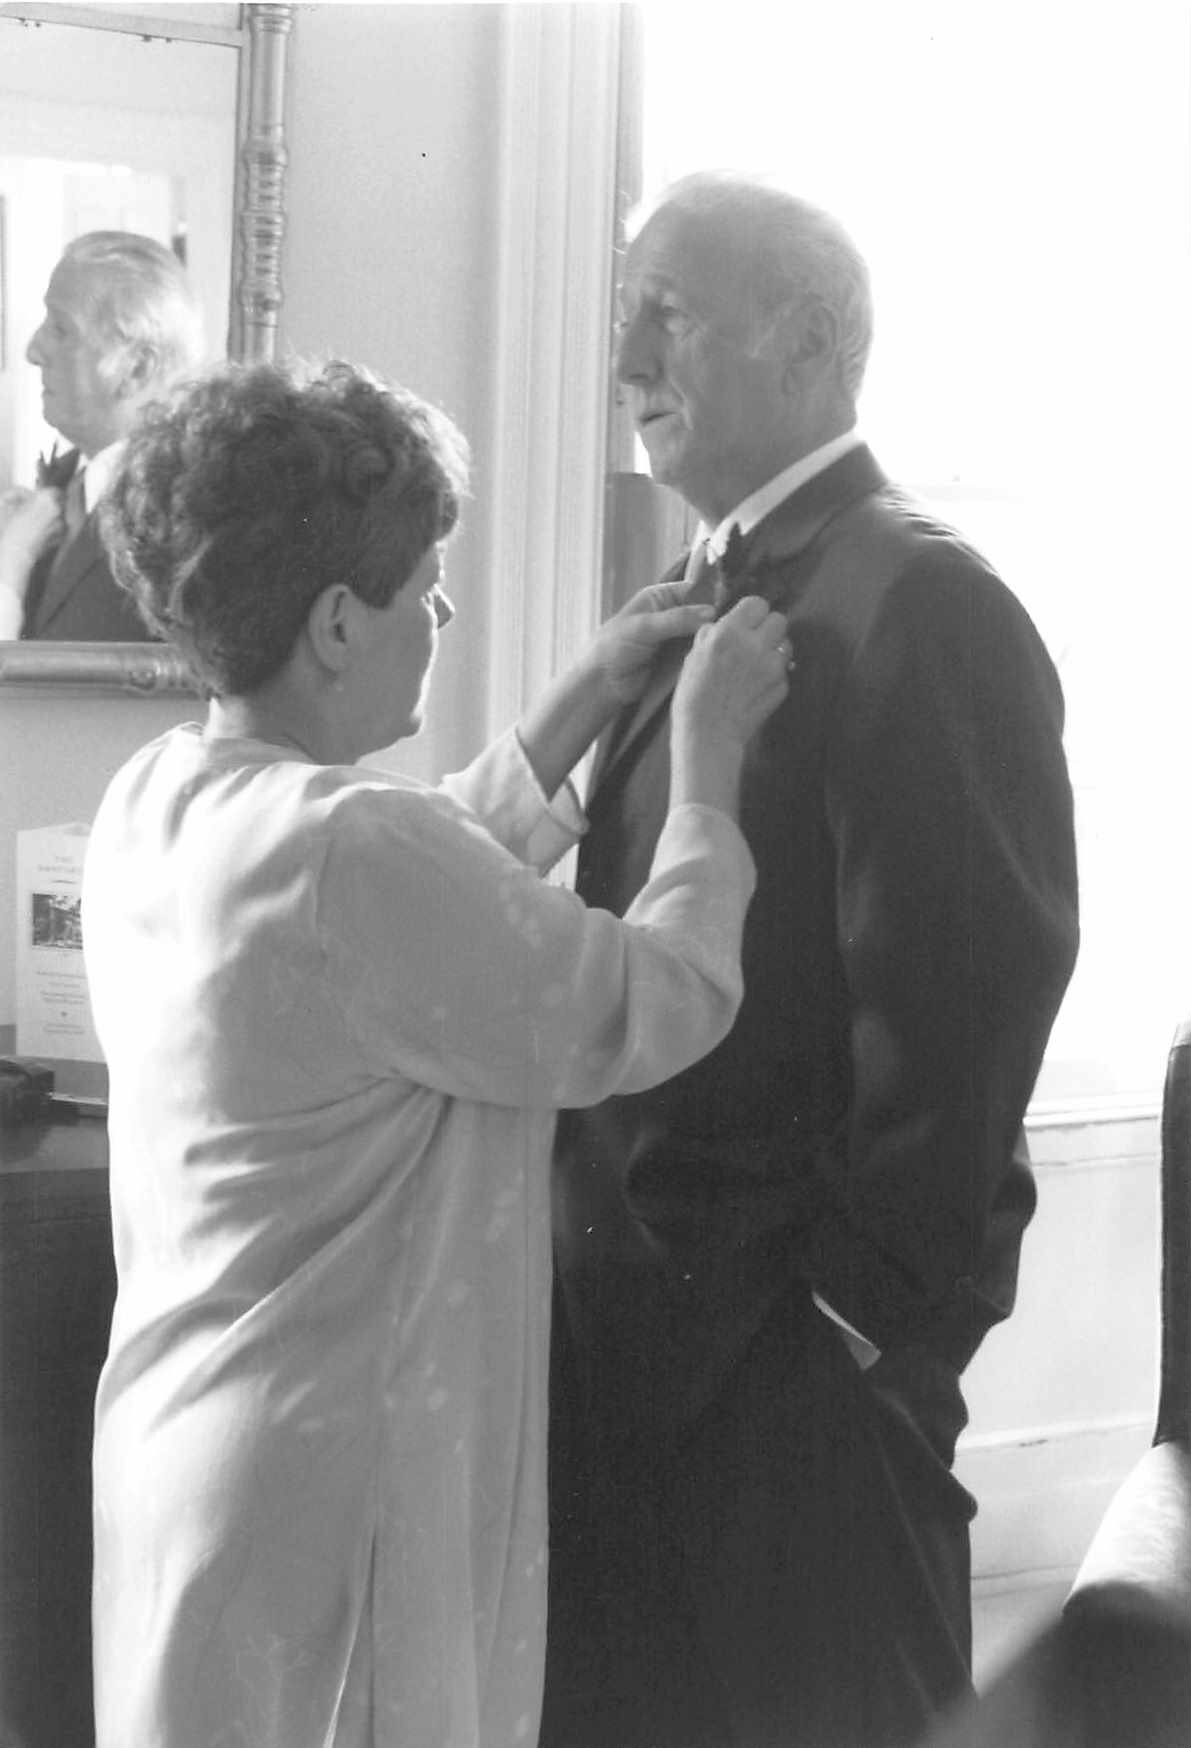 My mother and father at my wedding